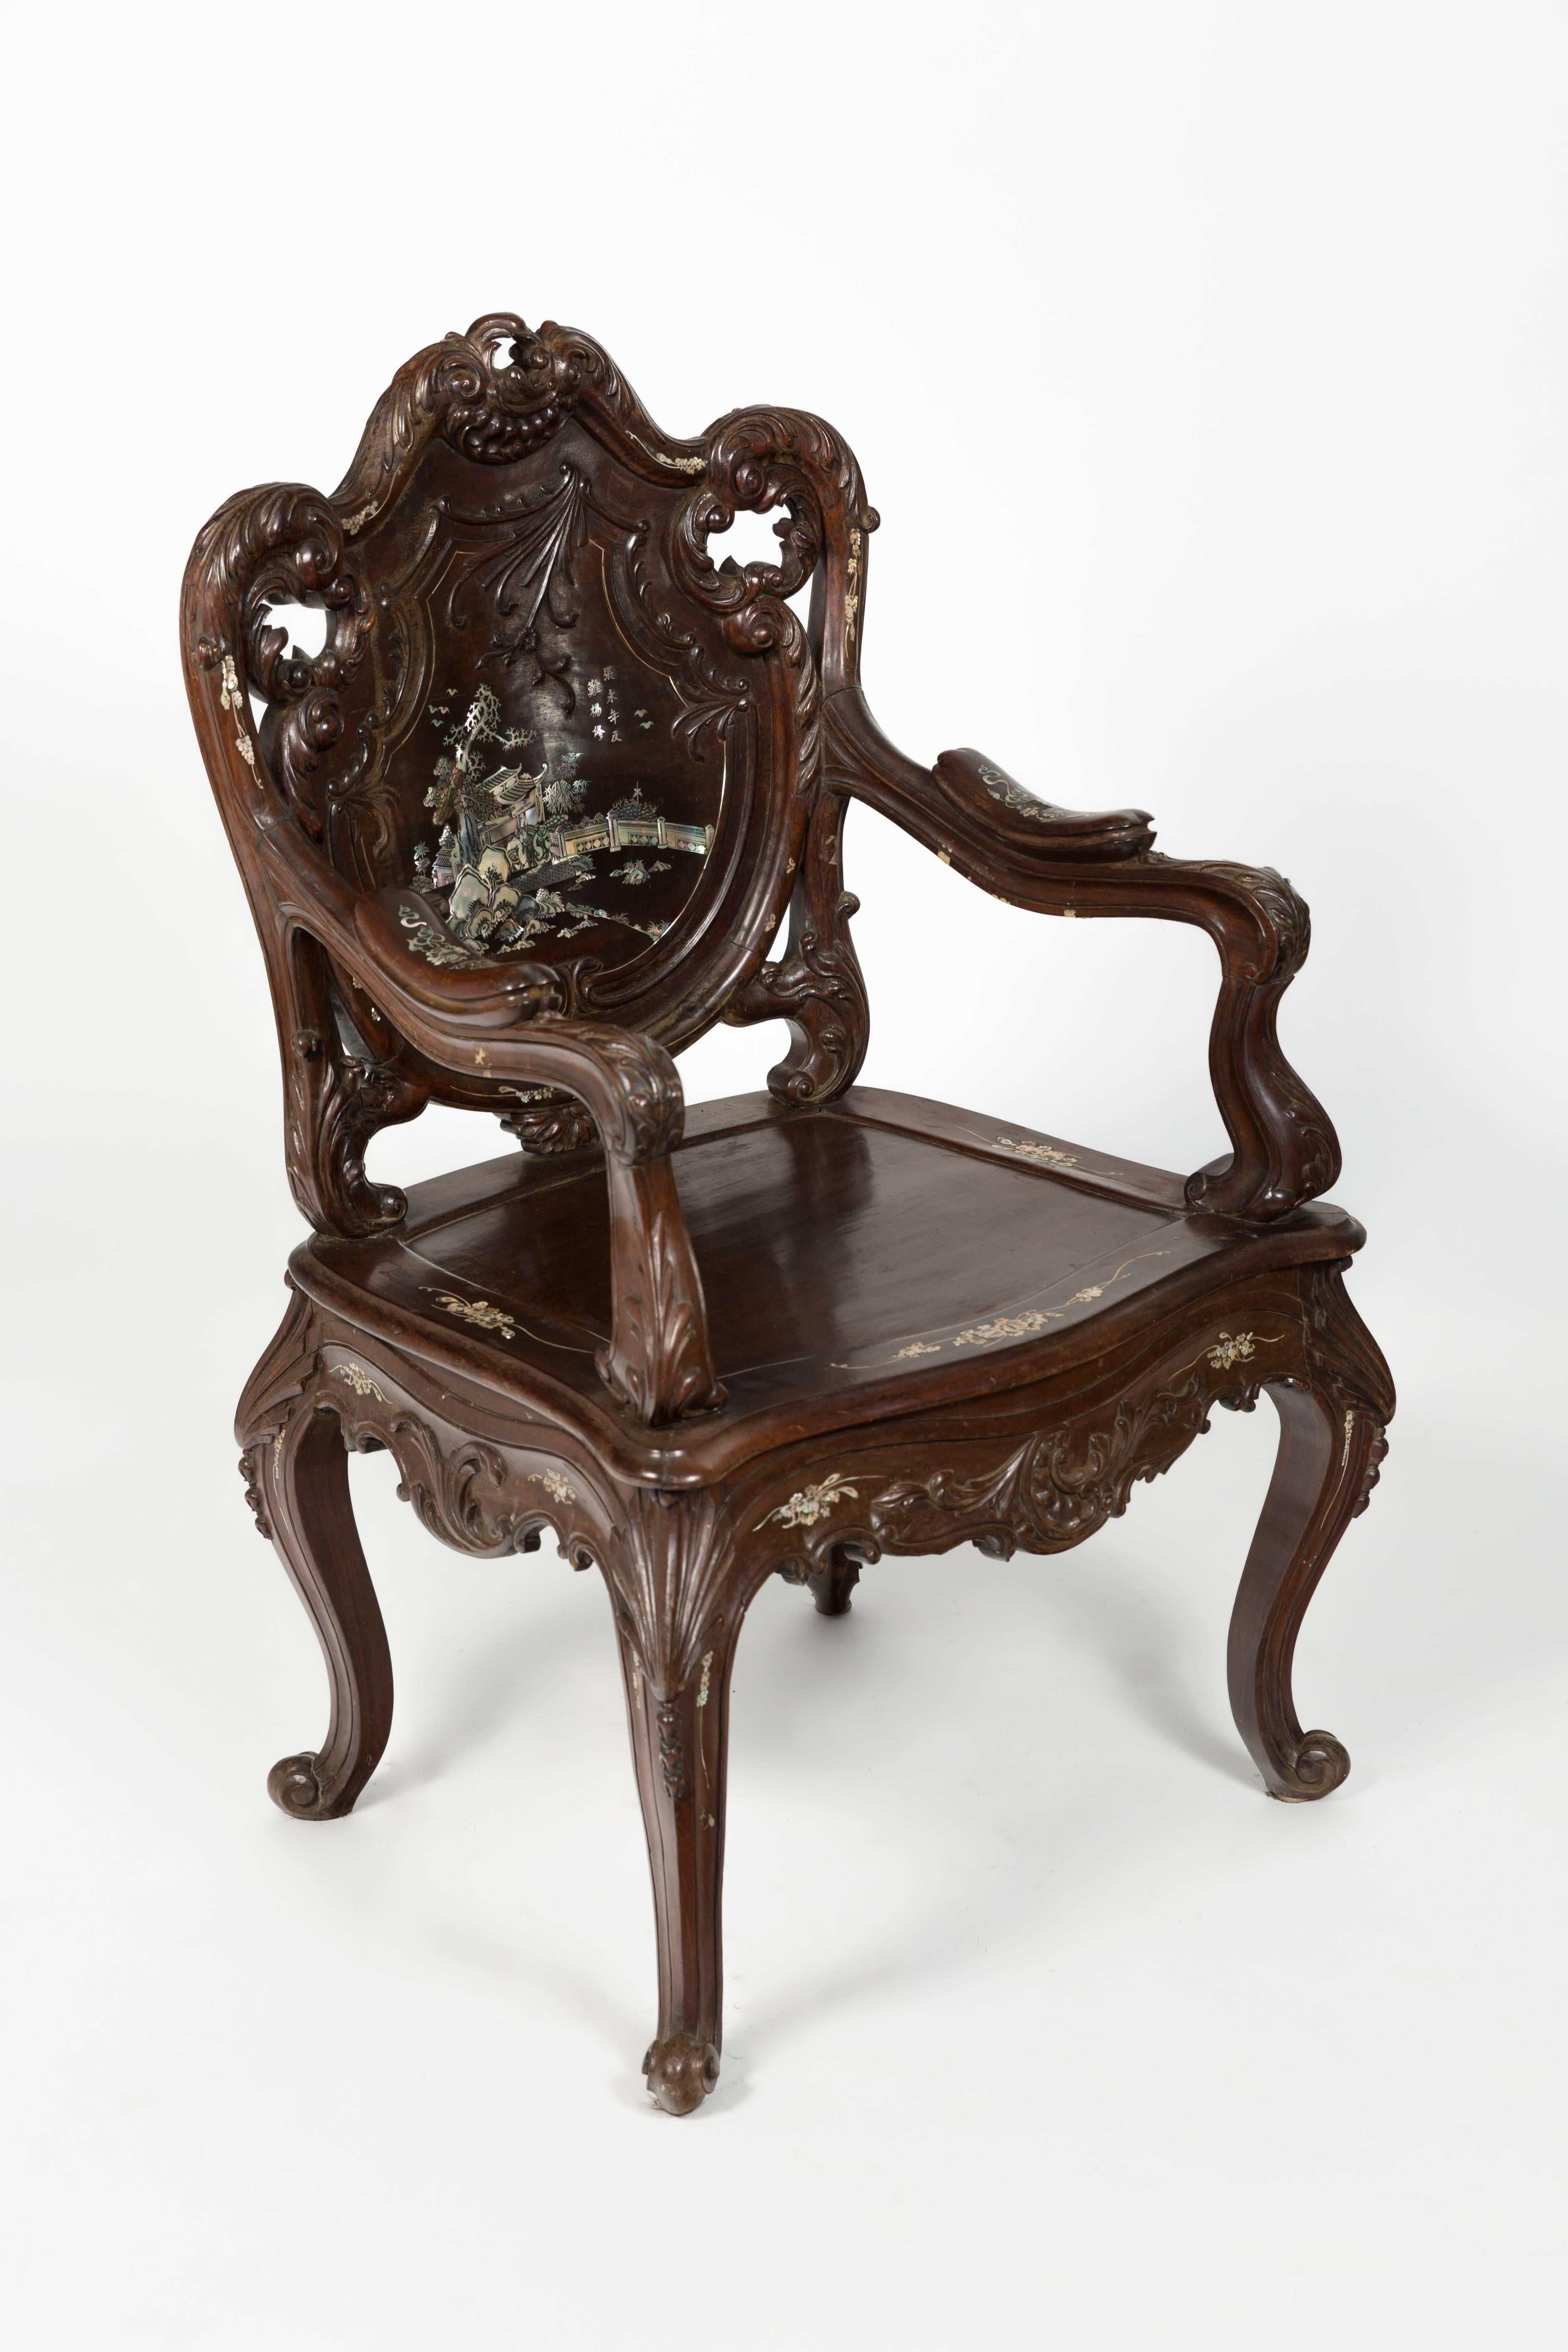 Pair of highly carved rosewood chairs with mother-of-pearl inlay. Mother-of-pearl inlay on the back and front of chair.

 